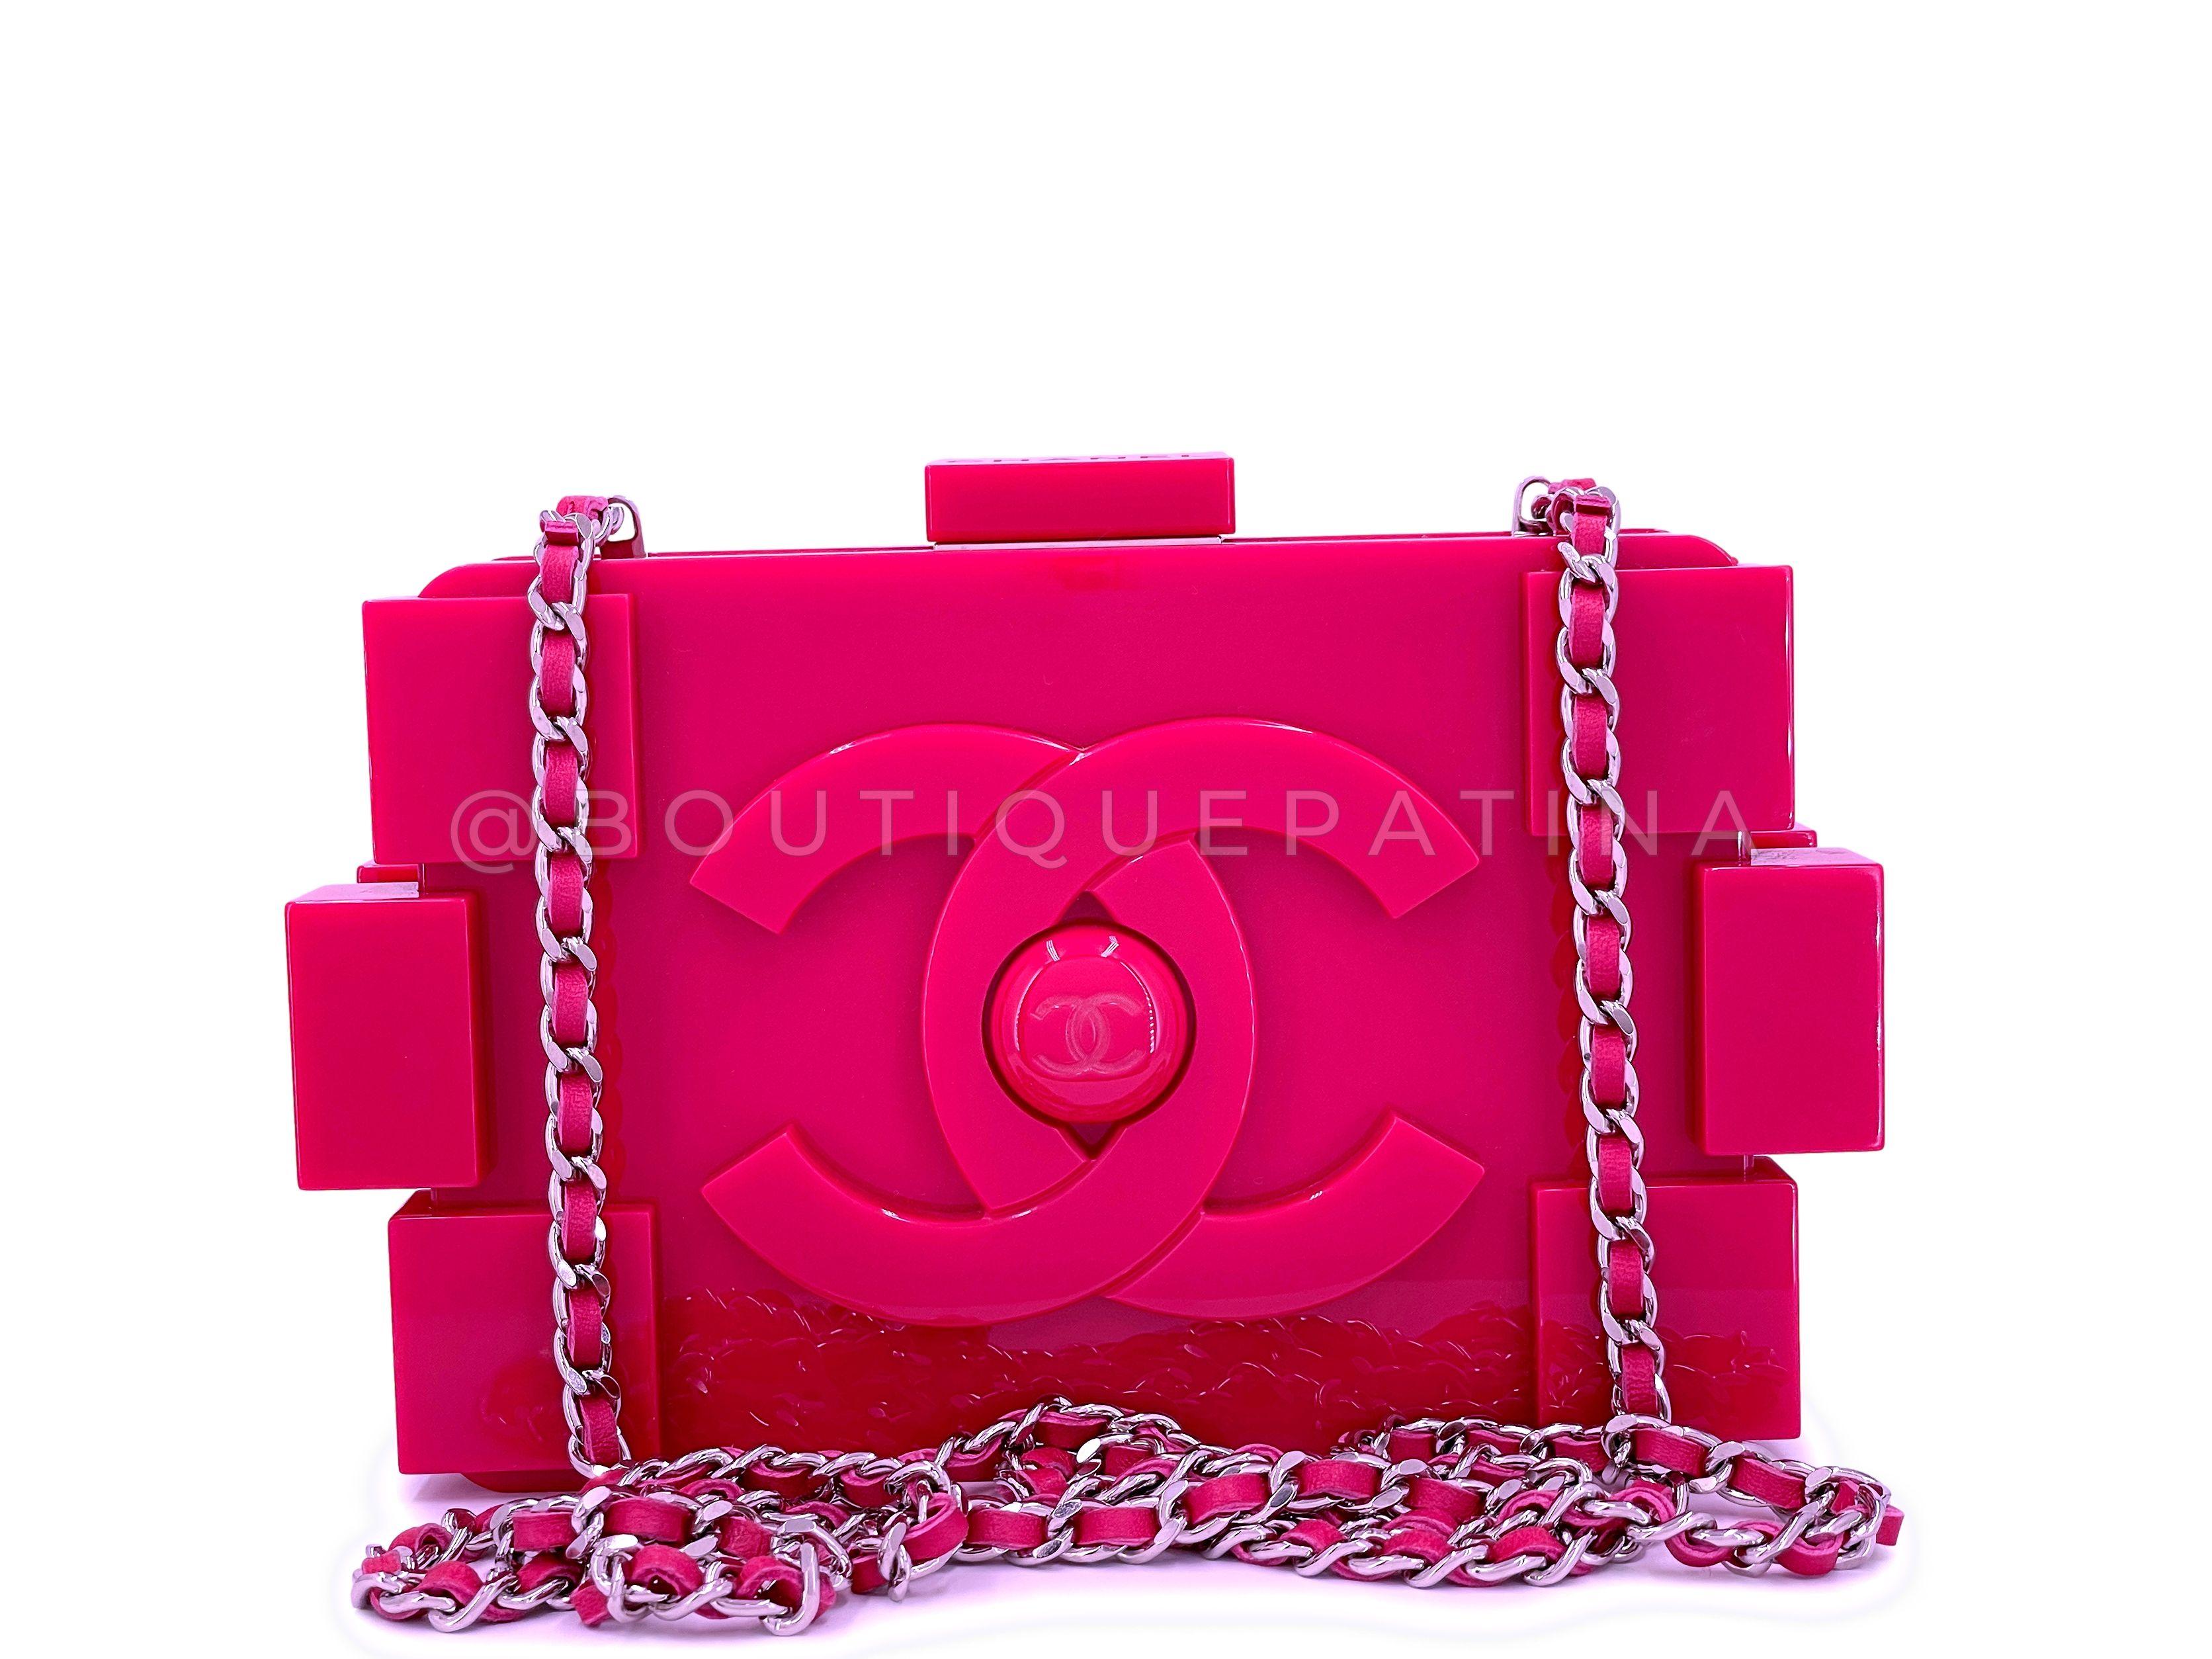 Store item: 67522
Chanel 2014 Pink Lego Brick Minaudière Plexiglass Clutch Shoulder Bag with woven chain in shiny ruthenium hardware.

Woven chain can be tucked/hidden inside or carried as a crossbody.

Dimensions are for the outside of the bag -